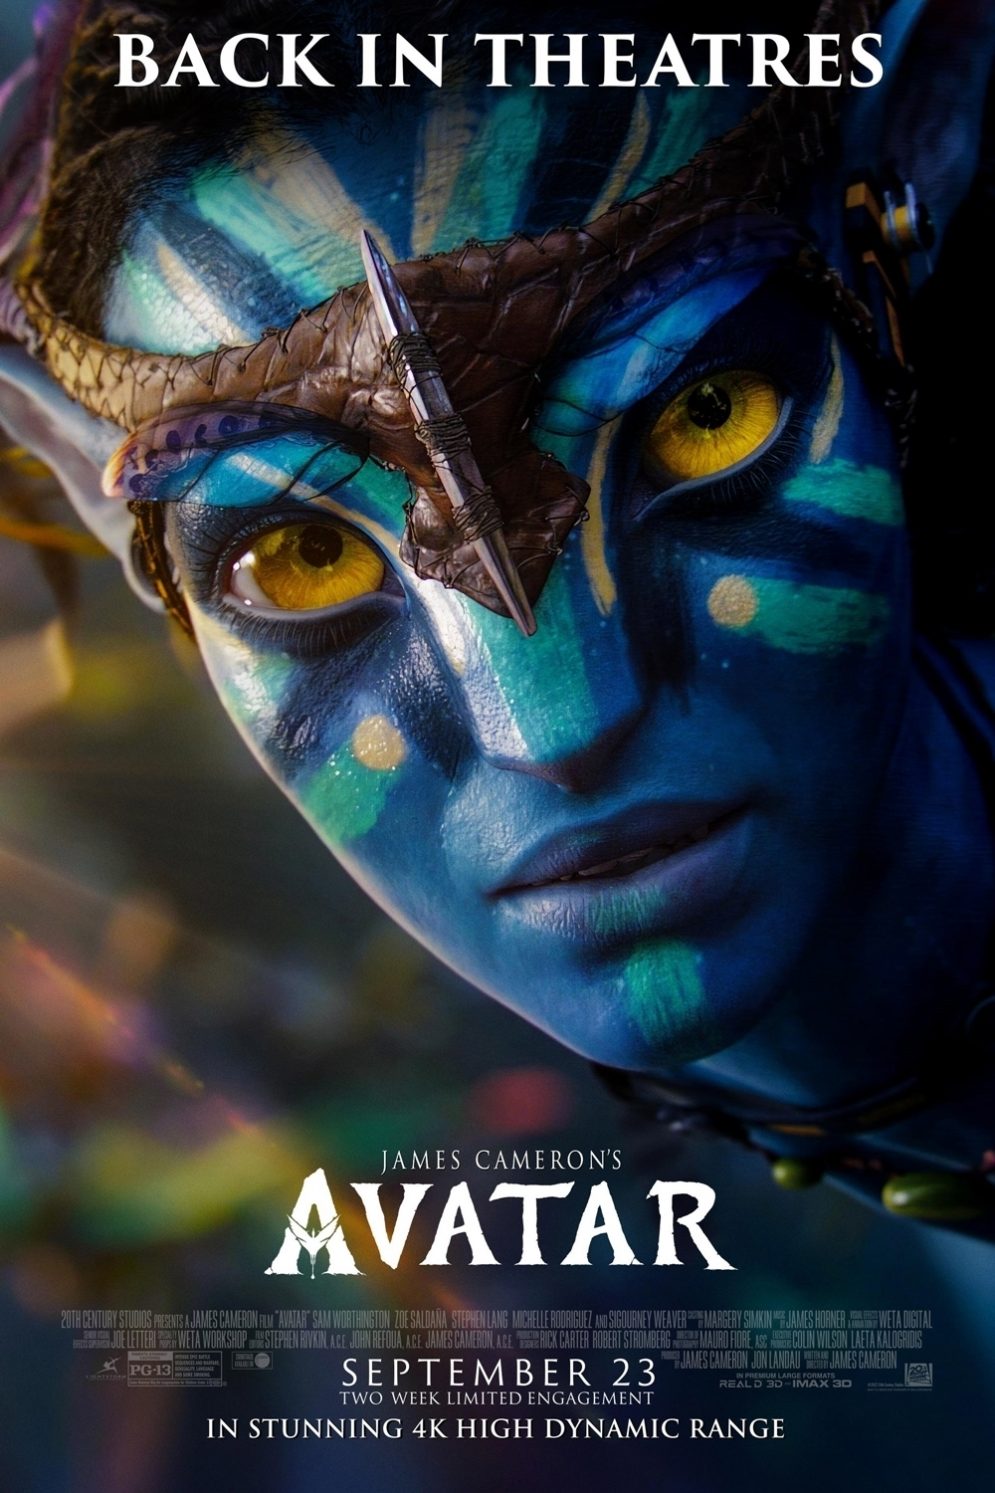 The AVATAR Adventure in IMAX3D – a short review.